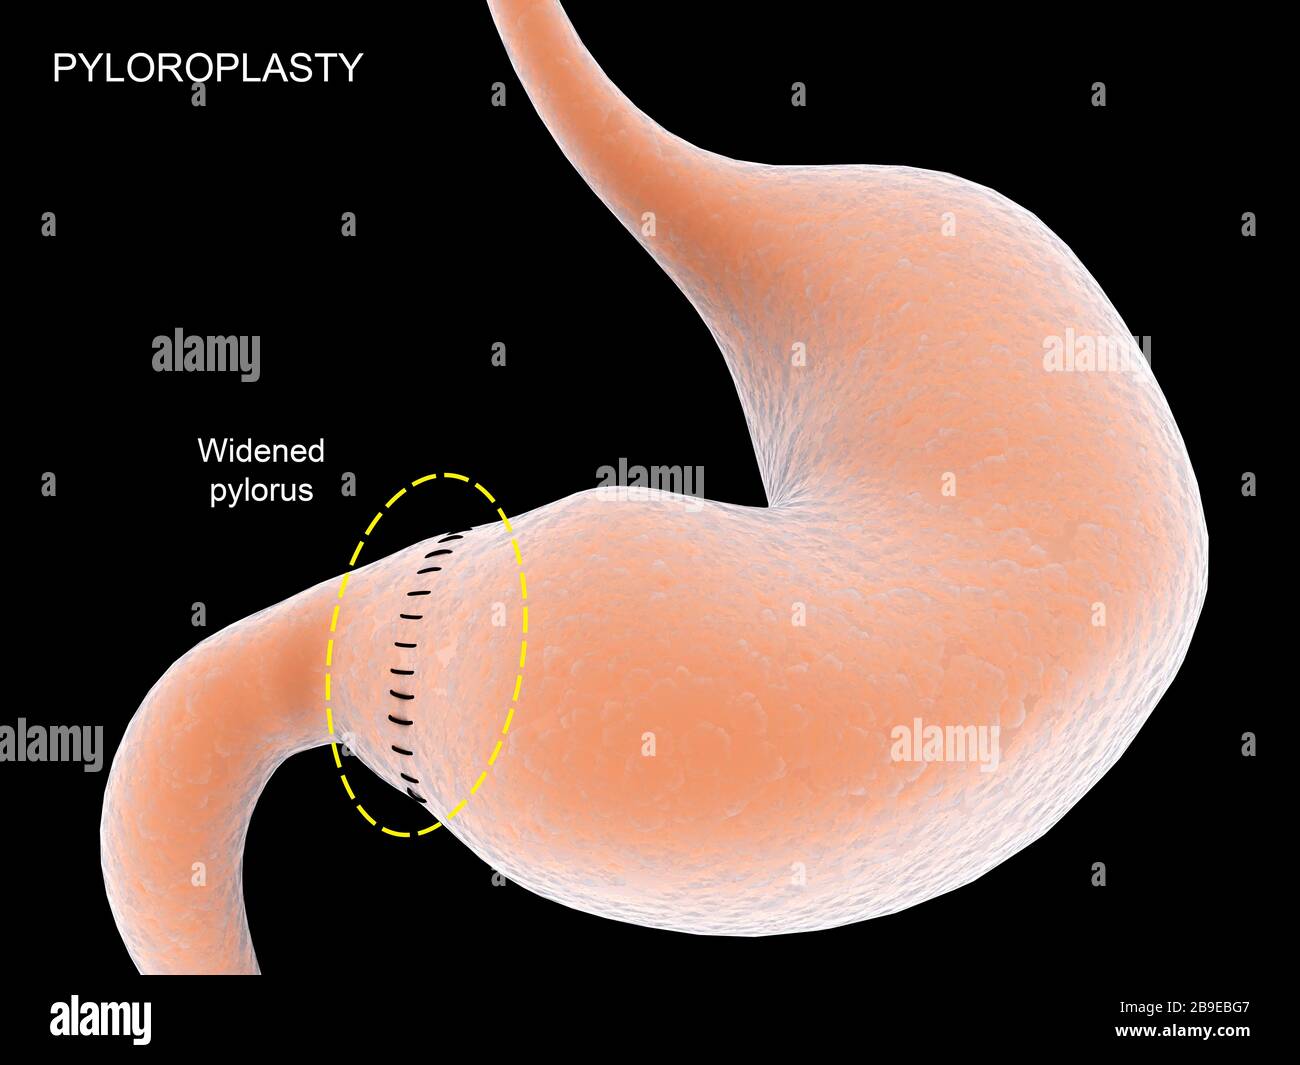 Medical illustration showing pyloroplasty, which widens the pylorus in stomach. Stock Photo